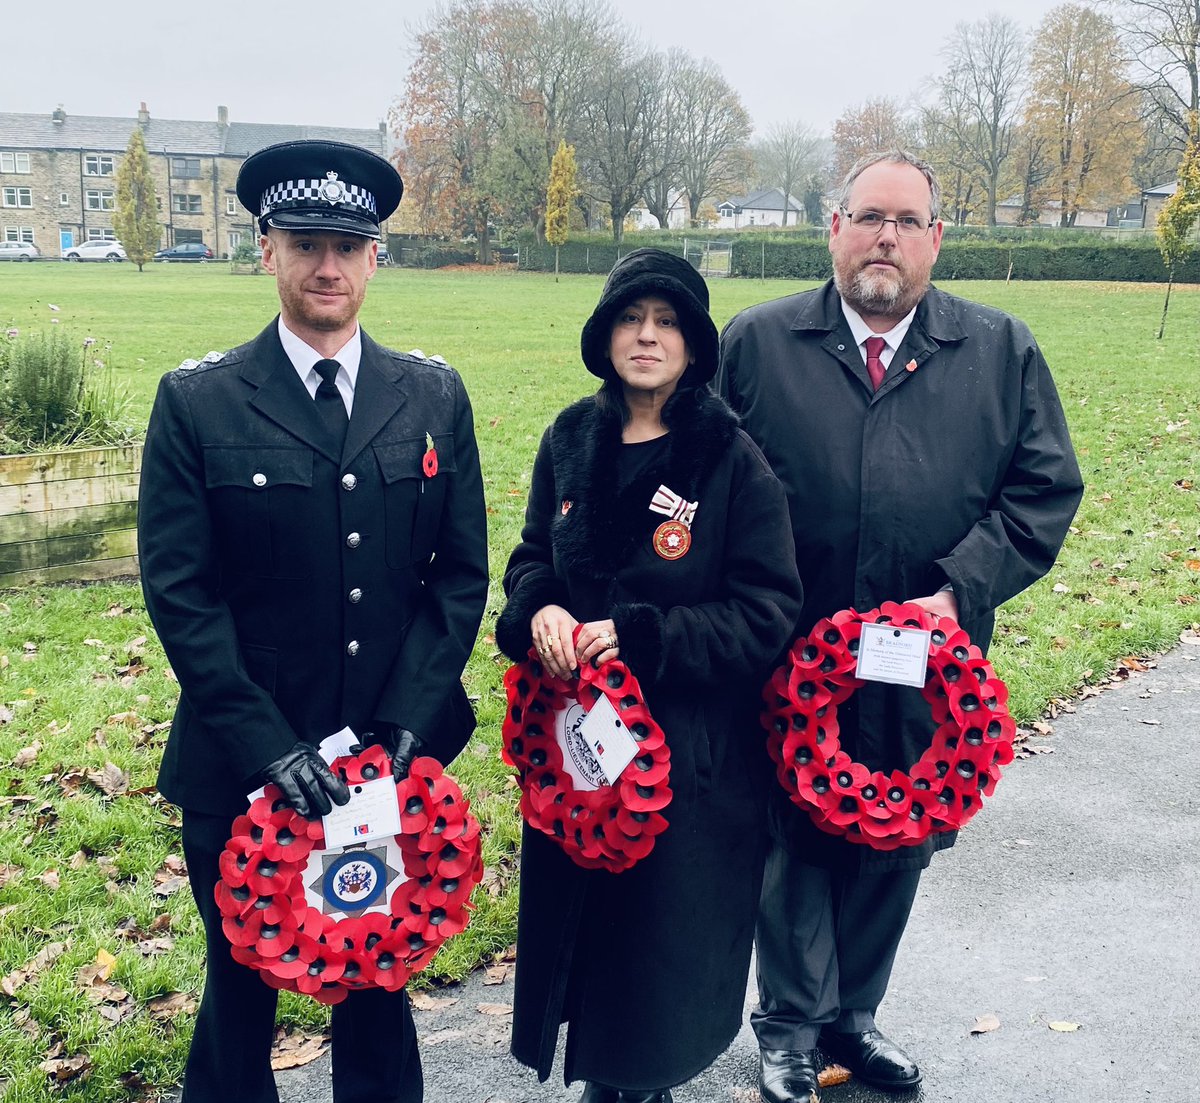 A great privilege and honour to represent @LordLtWY at the Remembrance procession and service at the cenotaph in Eccleshill . A huge turnout from the community despite the heavy rain to remember those who had made the ultimate sacrifice for our freedom and democracy!